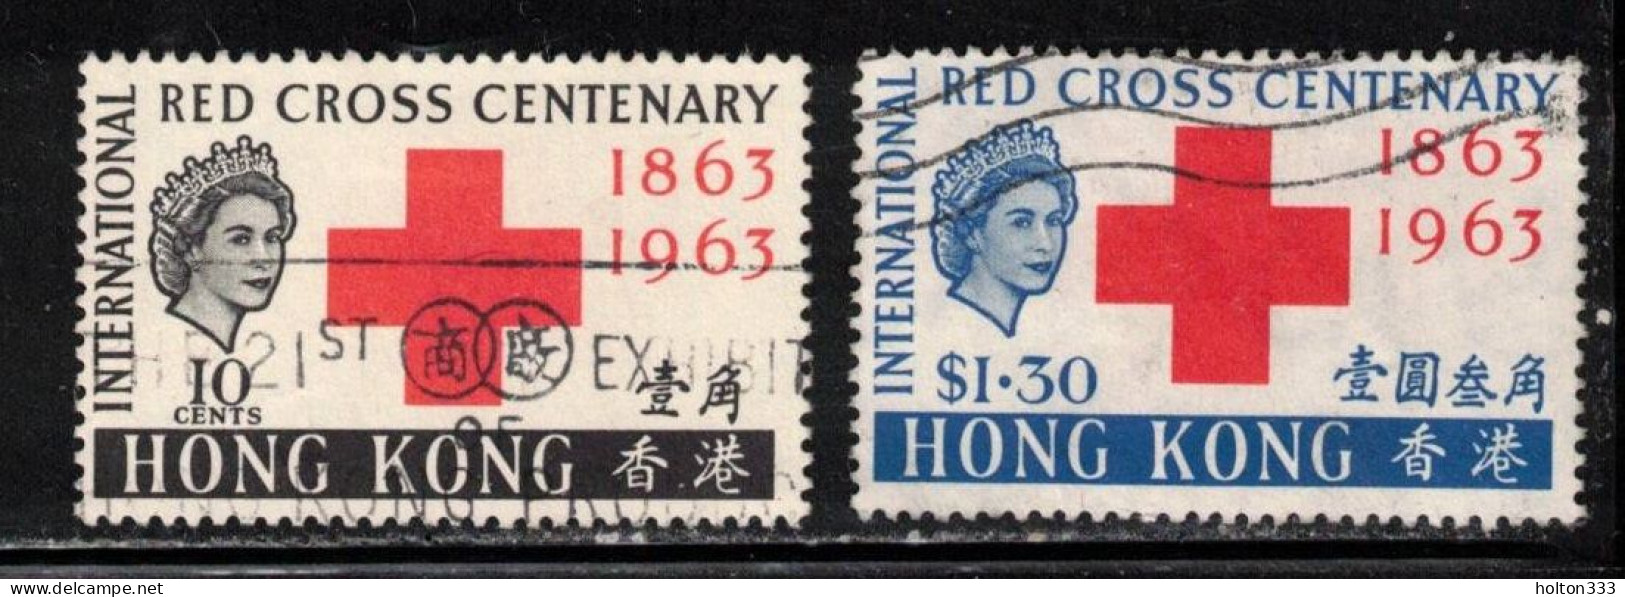 HONG KONG Scott # 219-20 Used - QEII Red Cross Issue - Used Stamps